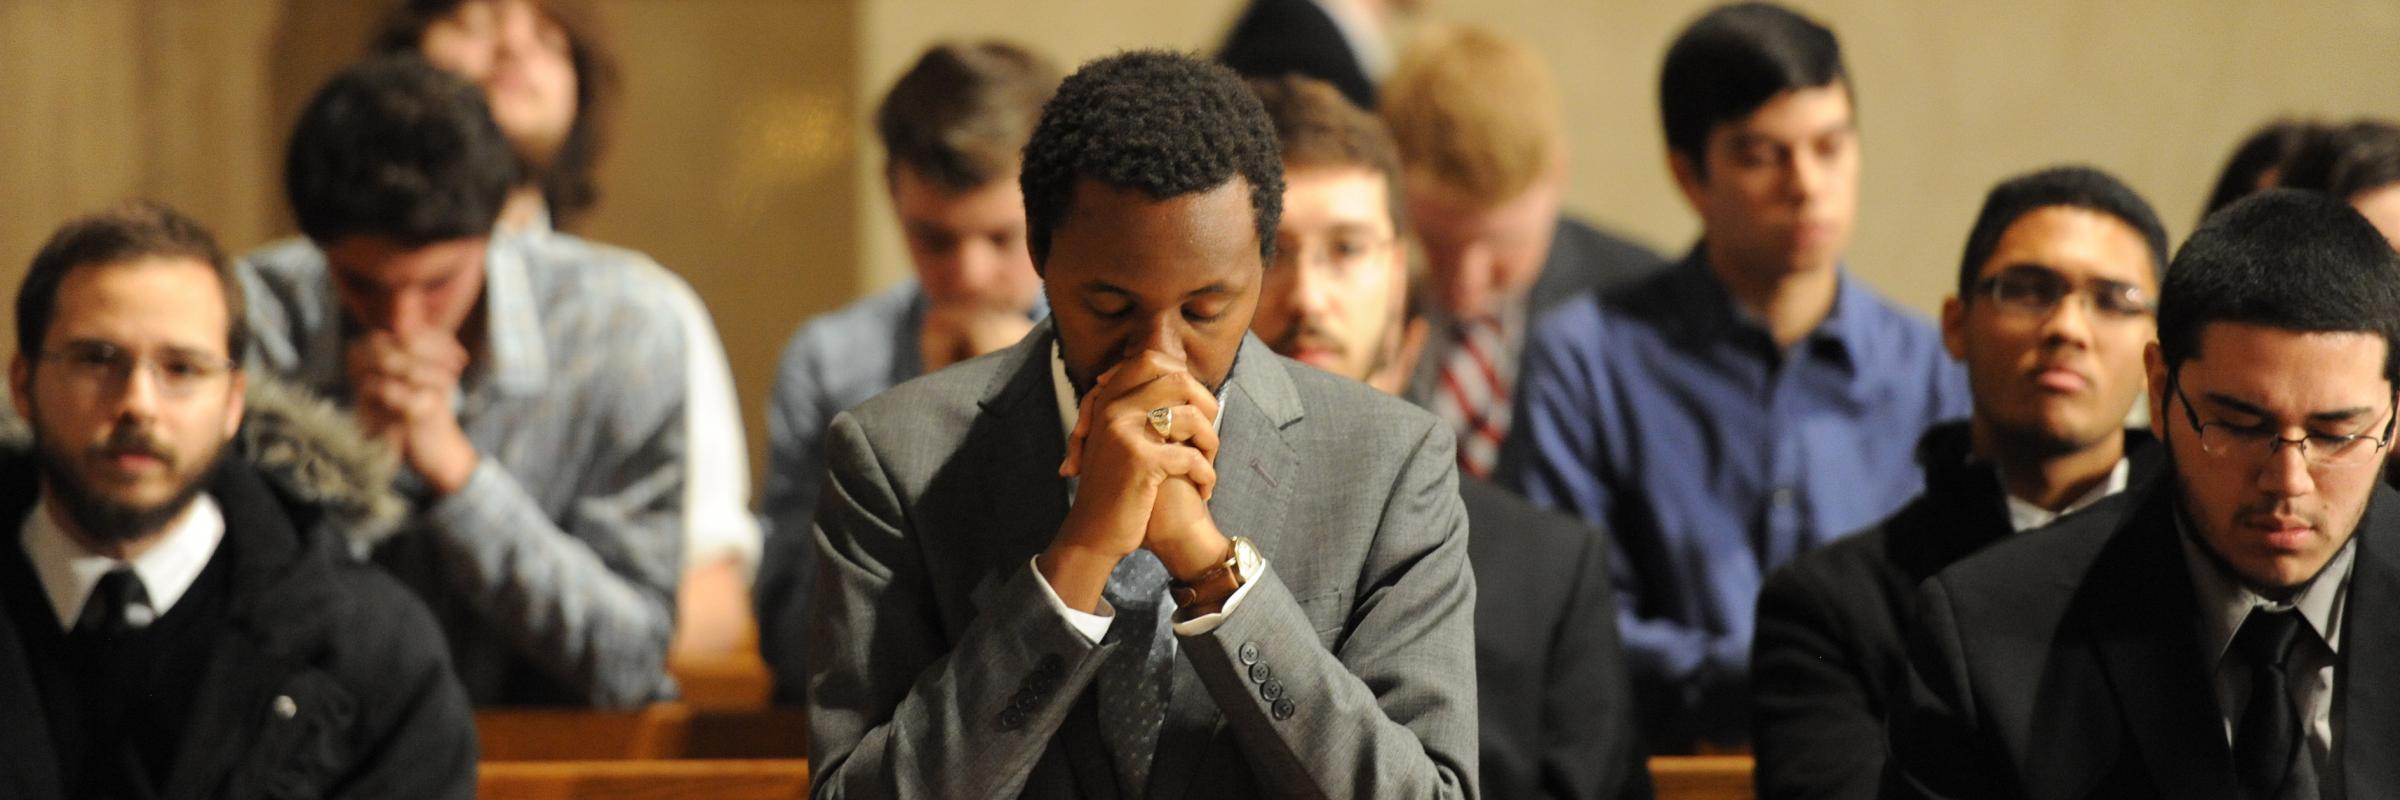 Students praying in the Caldwell Chapel